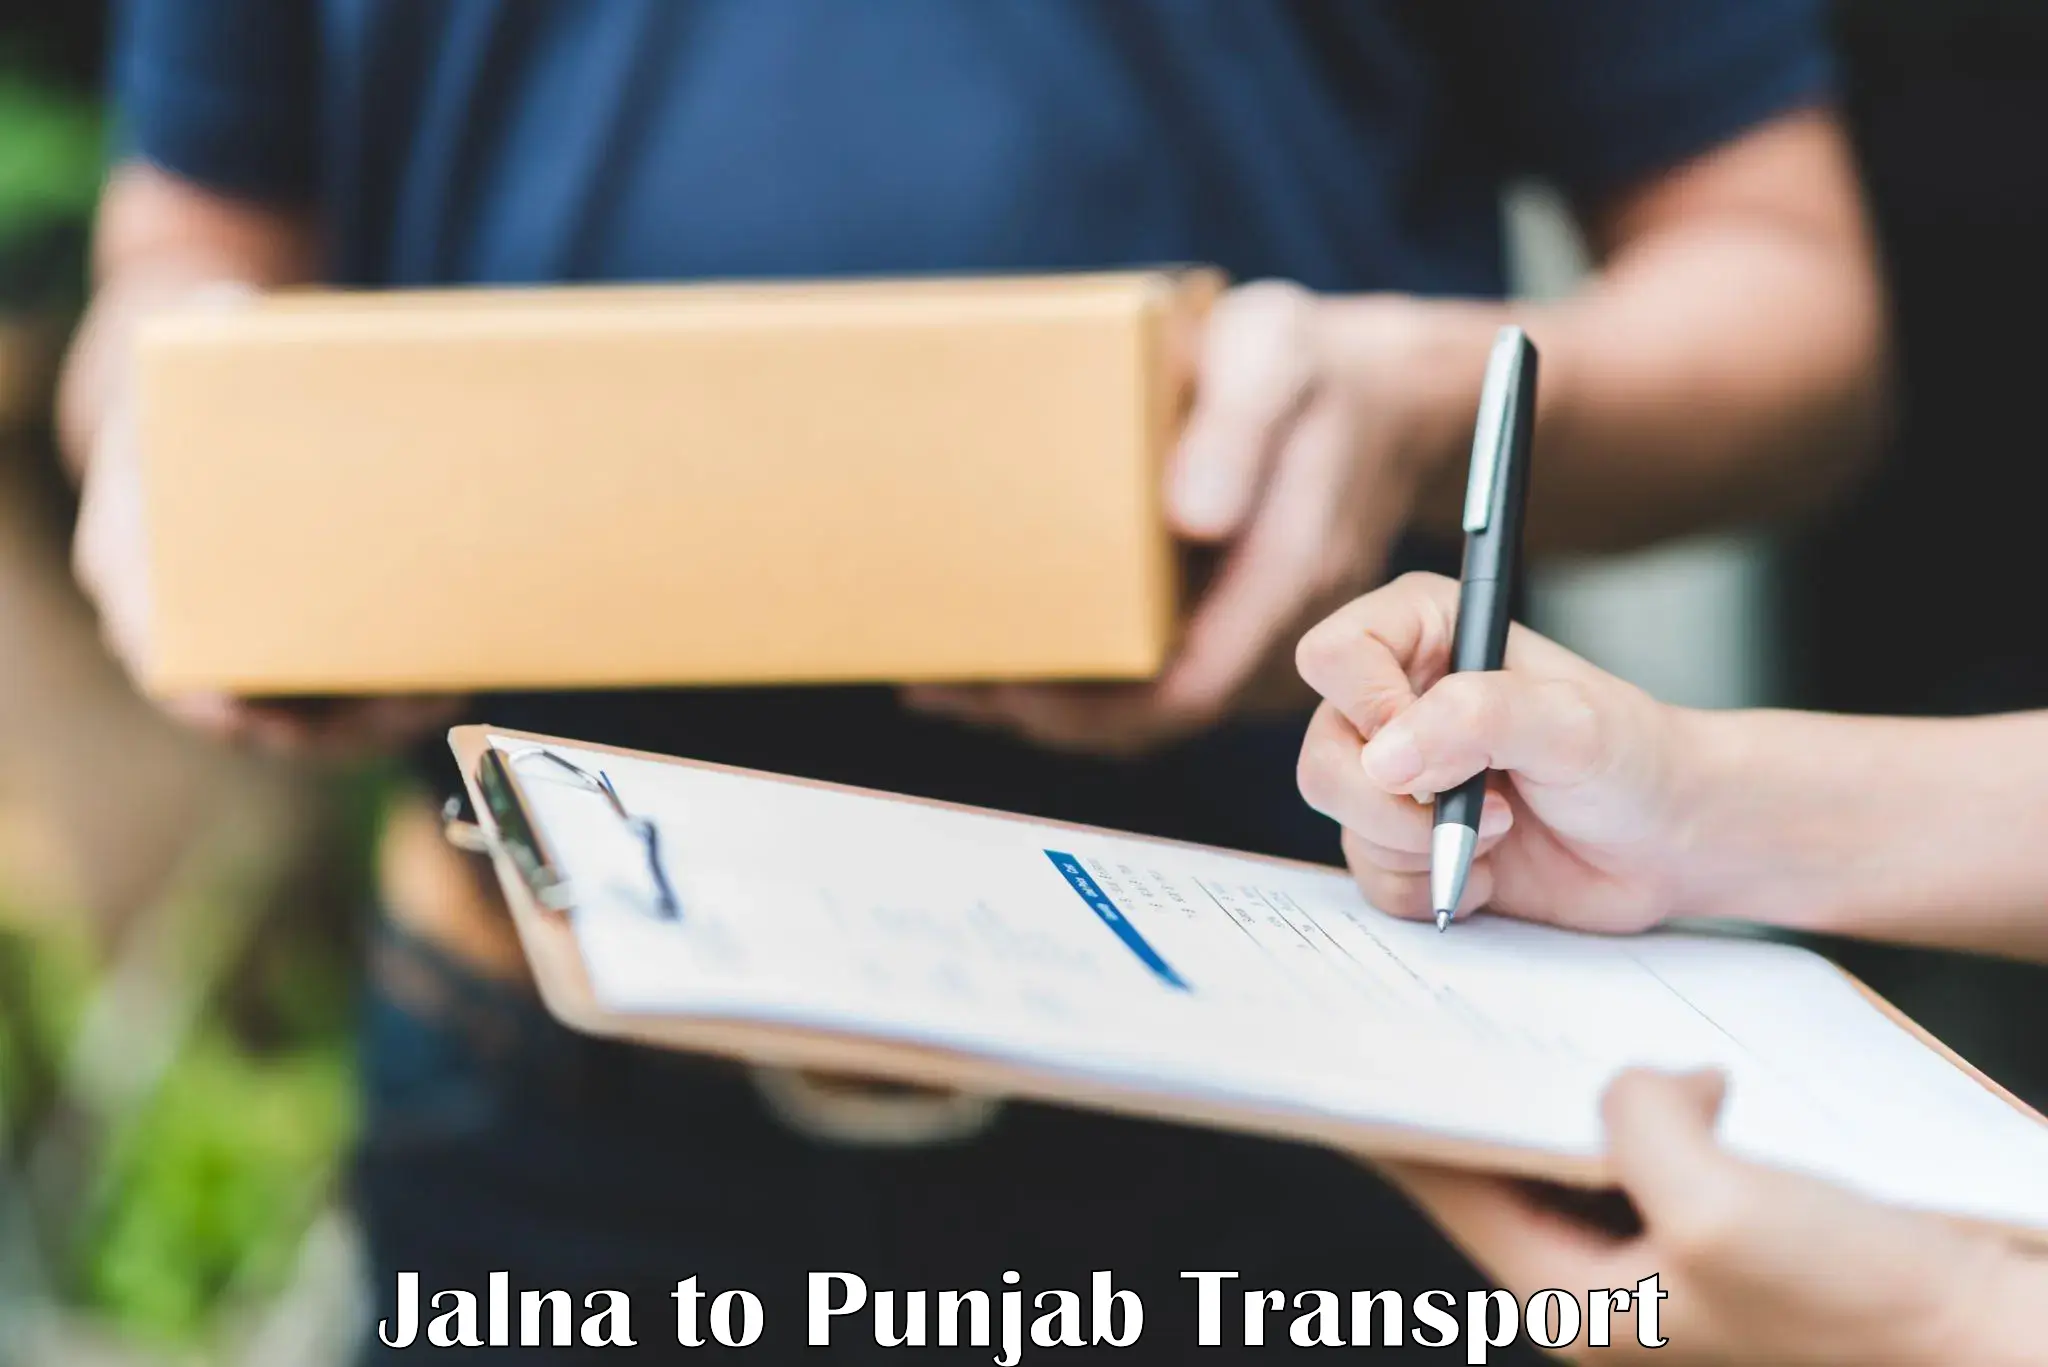 Transport shared services in Jalna to Muktsar